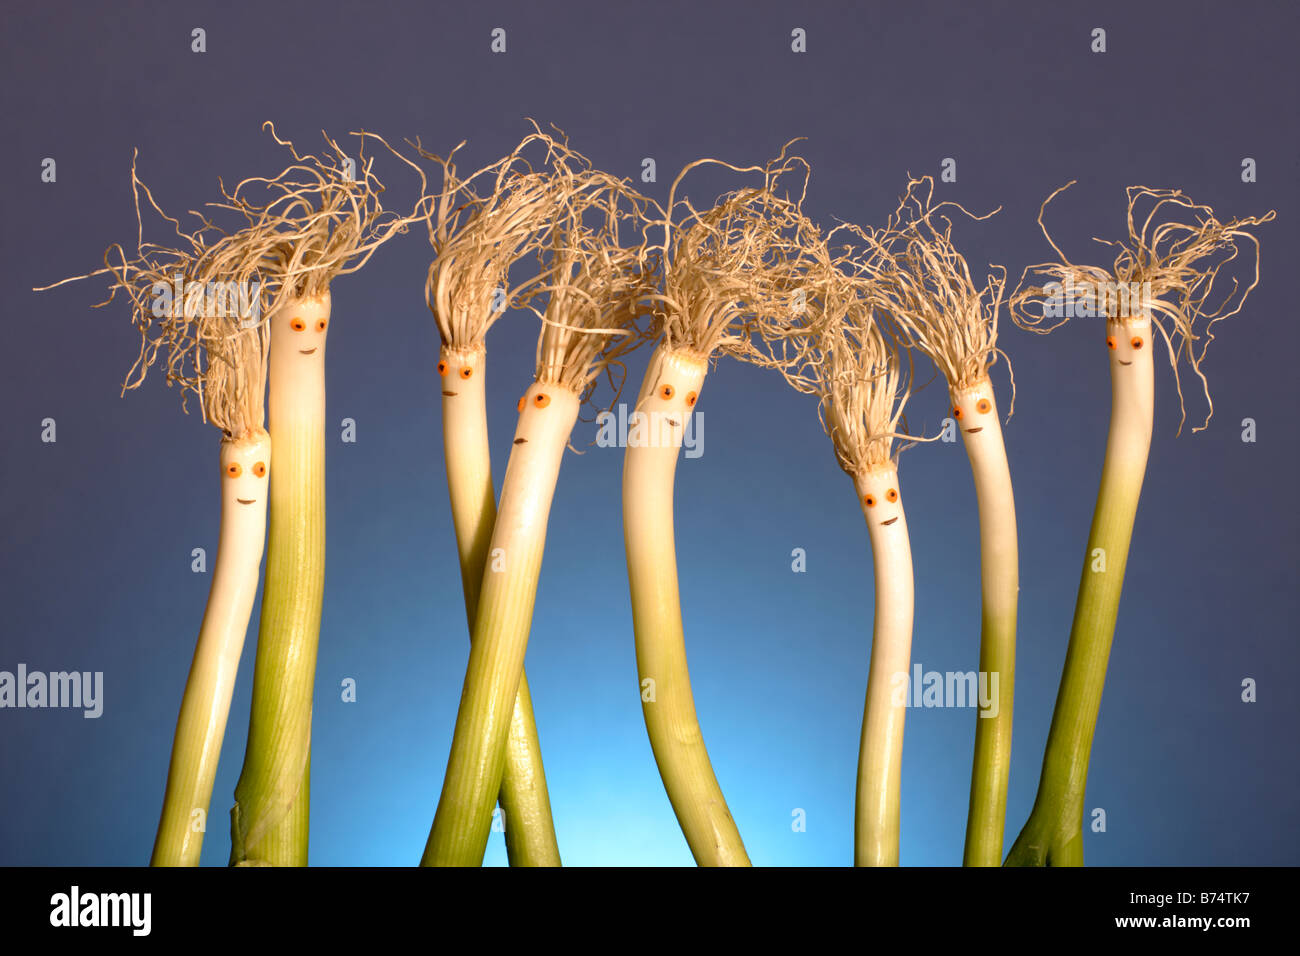 spring onion on party Stock Photo